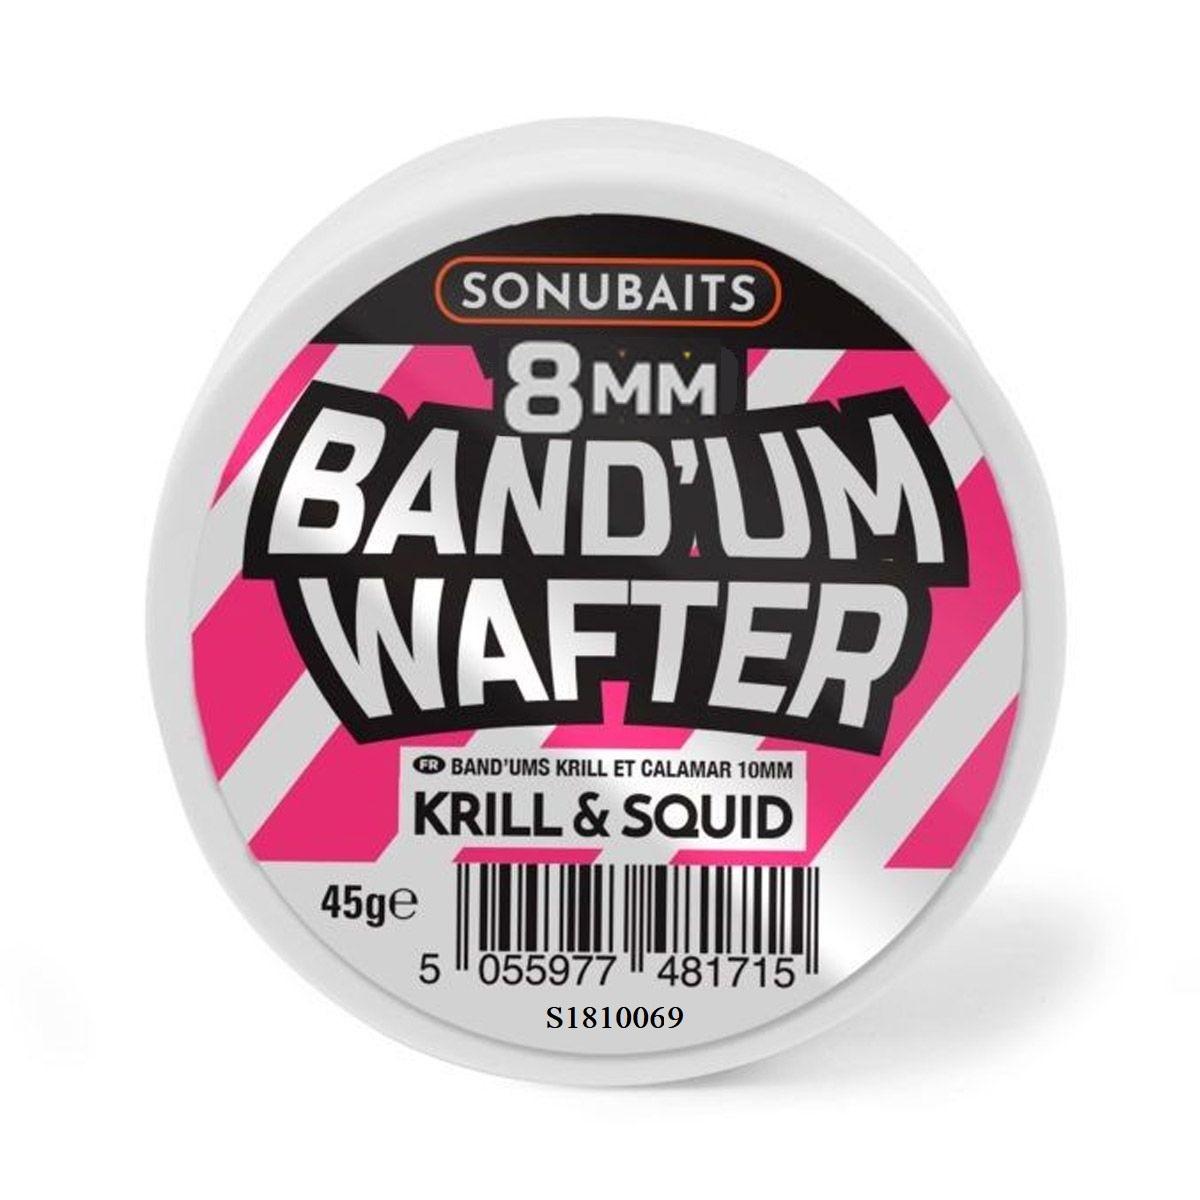 Sonubaits Band UM Wafters | Pineapple & Coconut 8mm